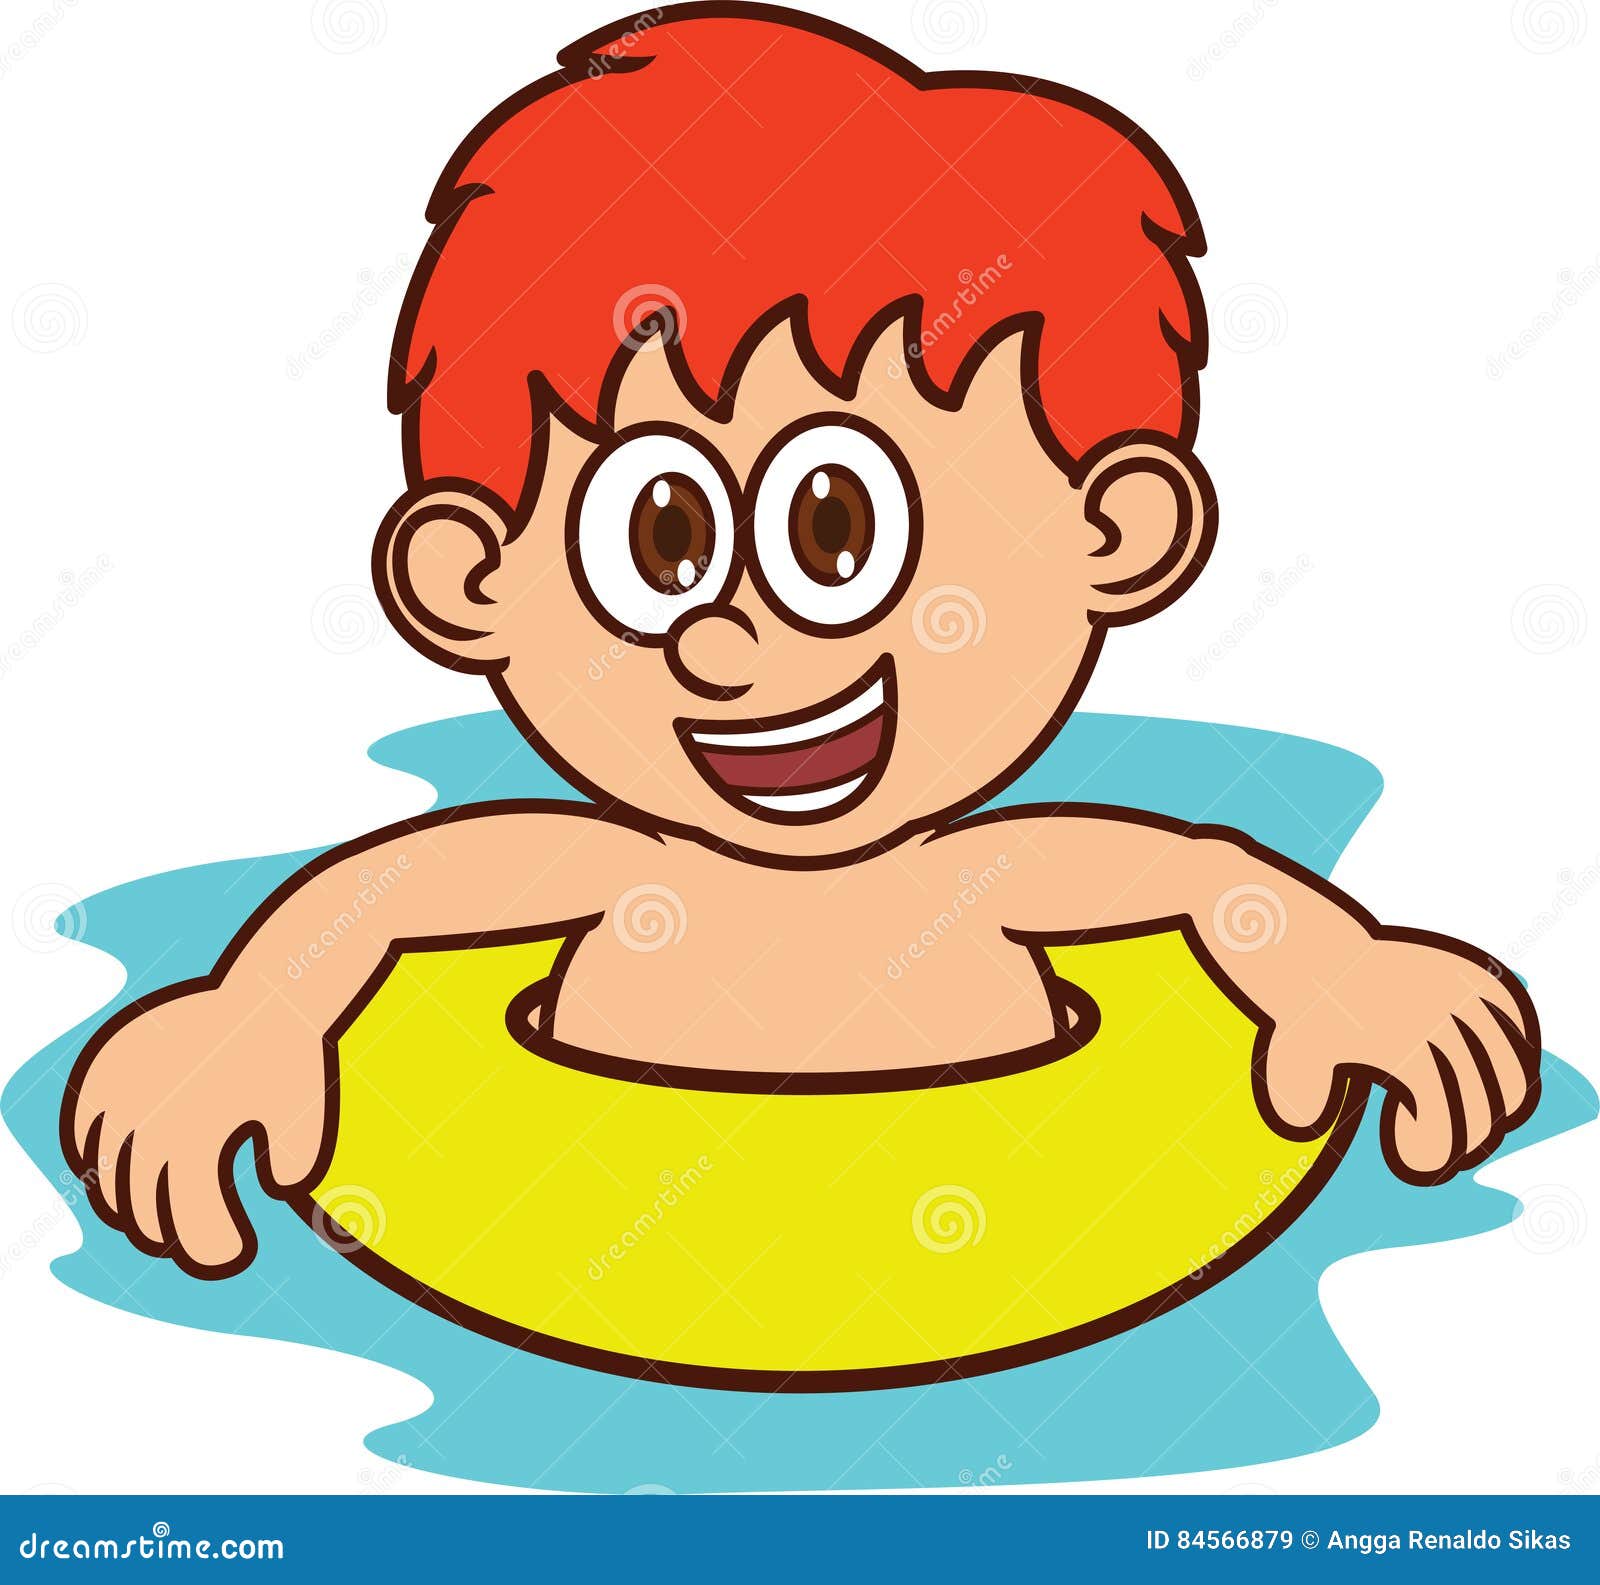 Boy Learning To Swim Cartoon Character Stock Vector - Illustration of  graphic, funny: 84566879